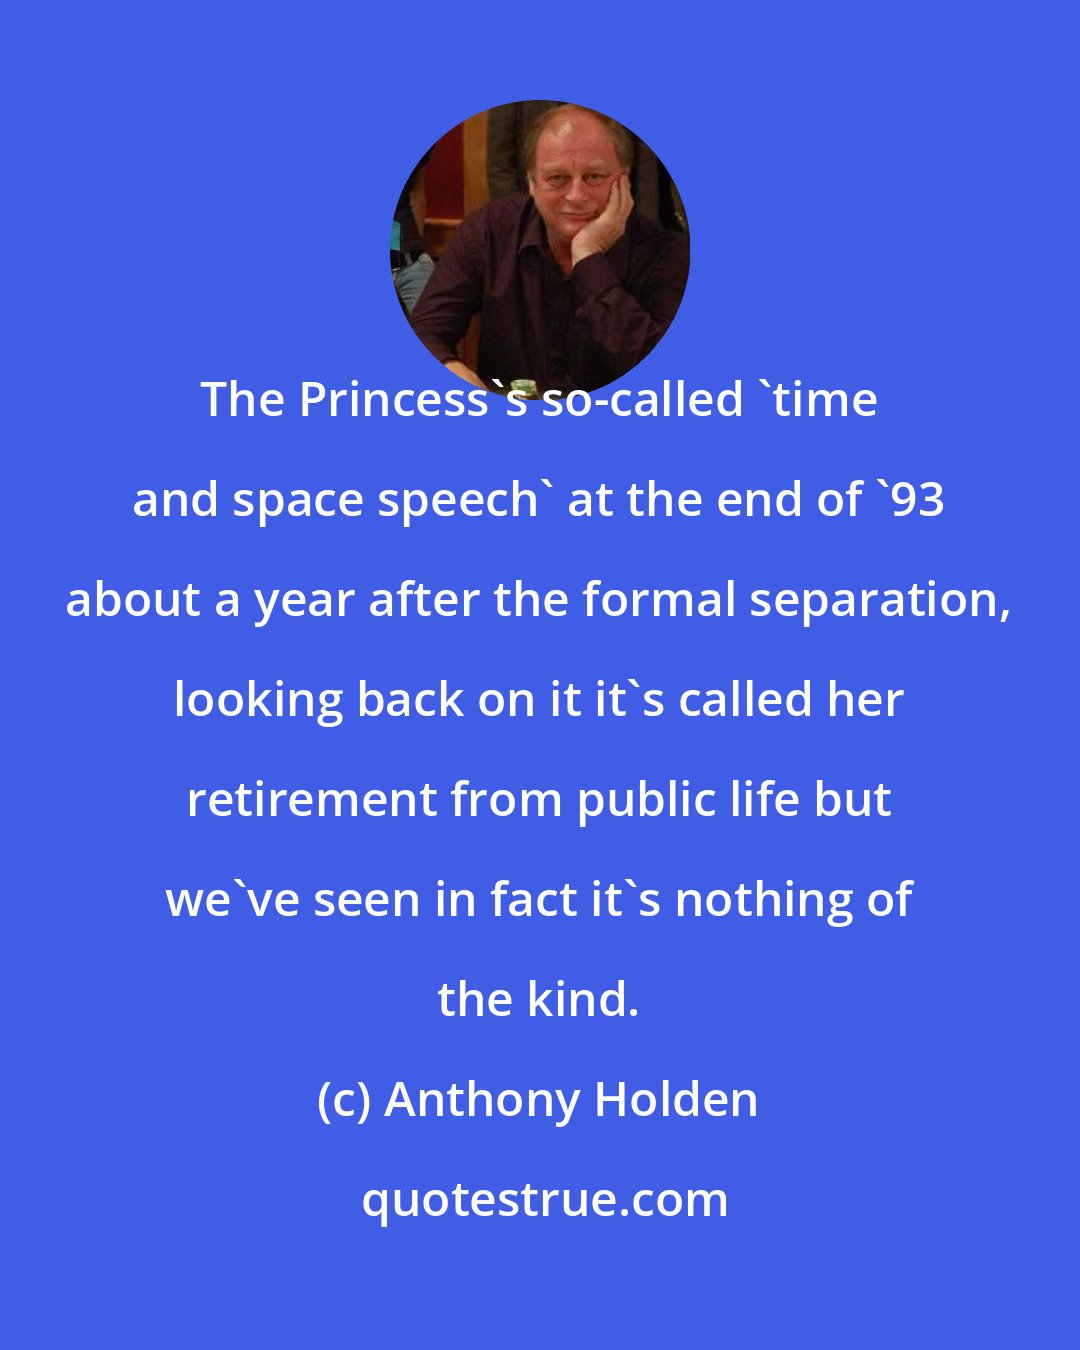 Anthony Holden: The Princess's so-called 'time and space speech' at the end of '93 about a year after the formal separation, looking back on it it's called her retirement from public life but we've seen in fact it's nothing of the kind.